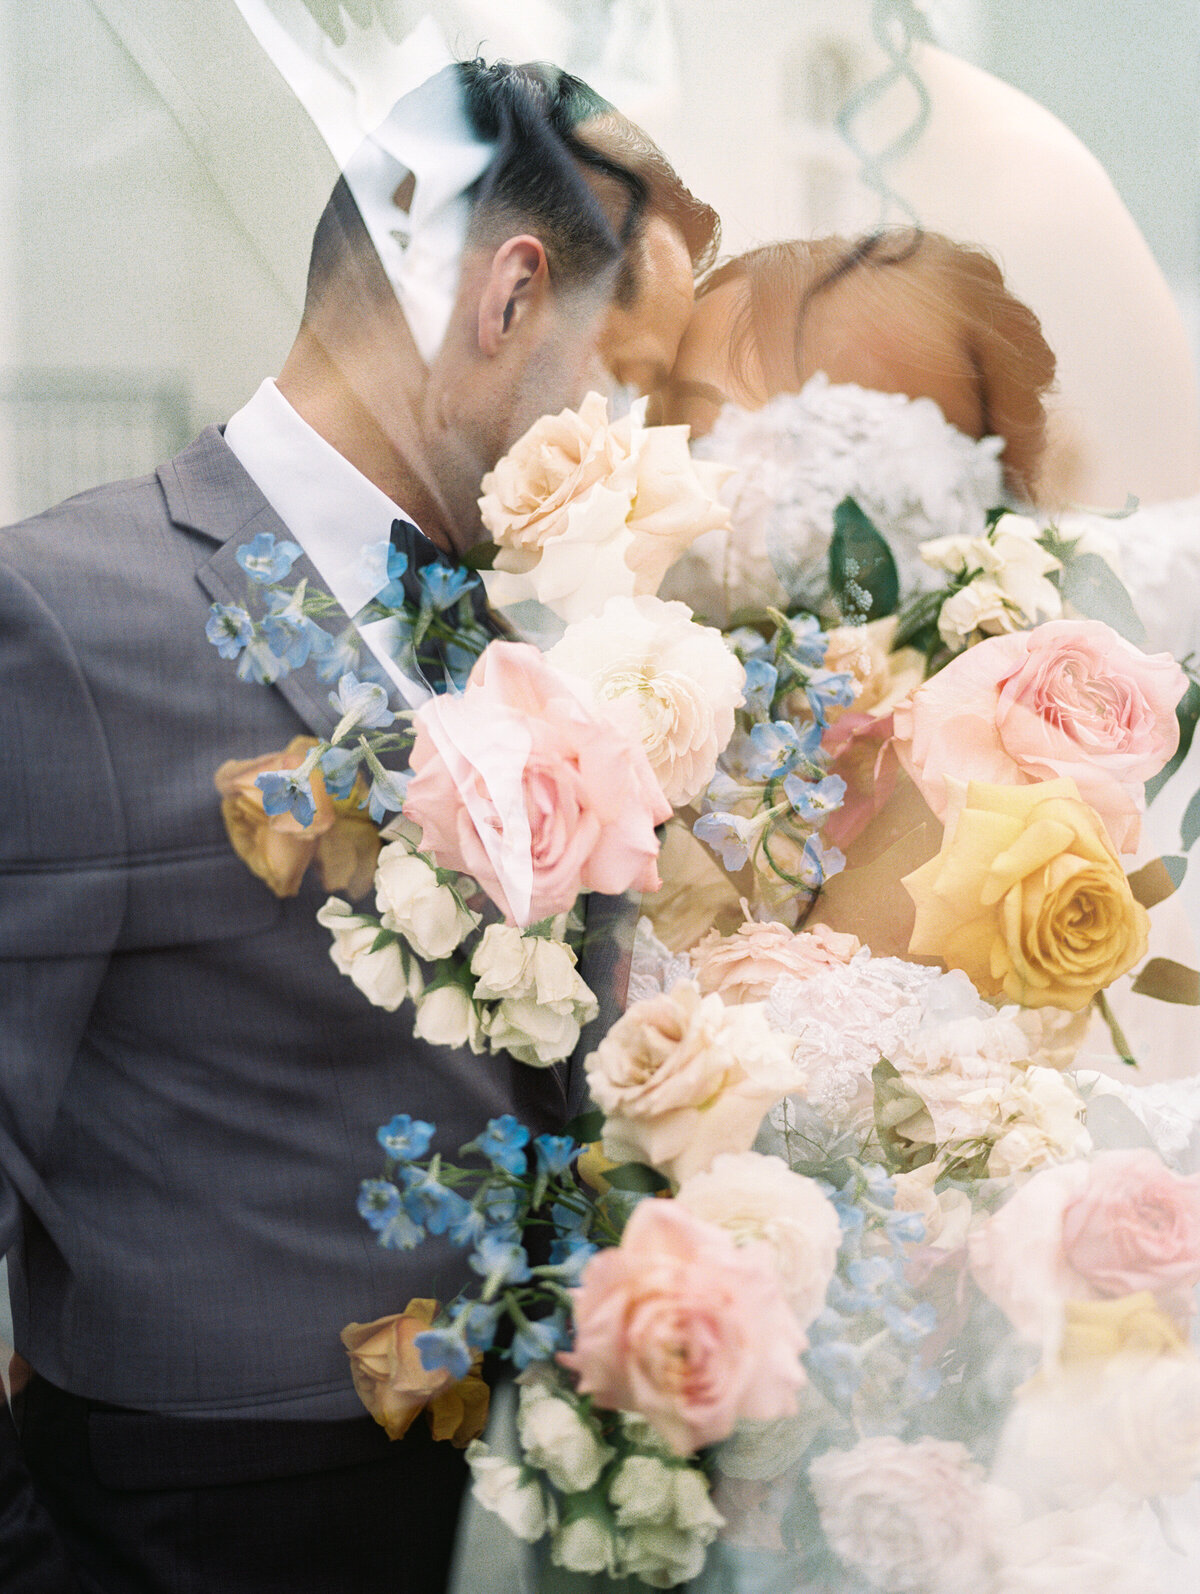 Bride and Groom with colorful flowers at garden party wedding at Chateau Nouvelle